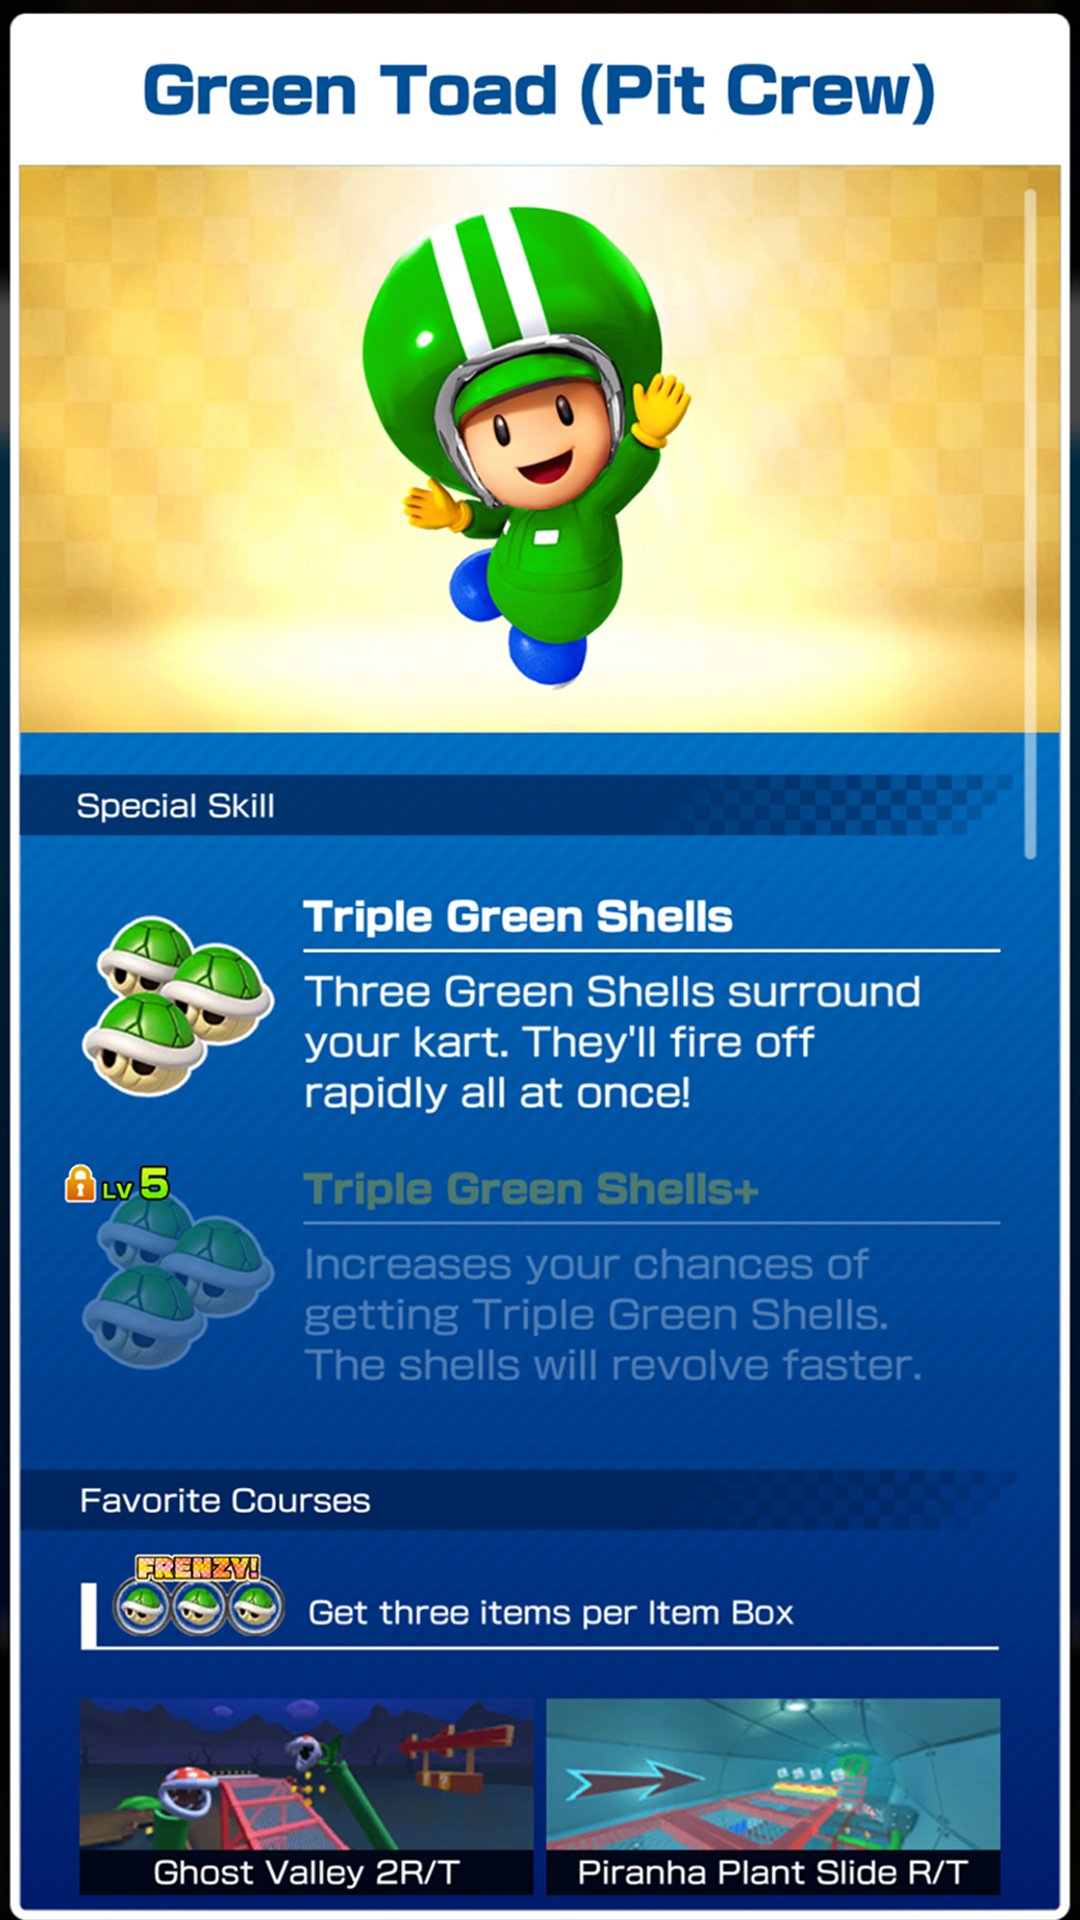 Mario Kart Tour on X: "The ? Block Mii Racing Suit and new Green Toad (Pit  Crew) driver are here! Get them as rewards for placing high in the ranked  cup during